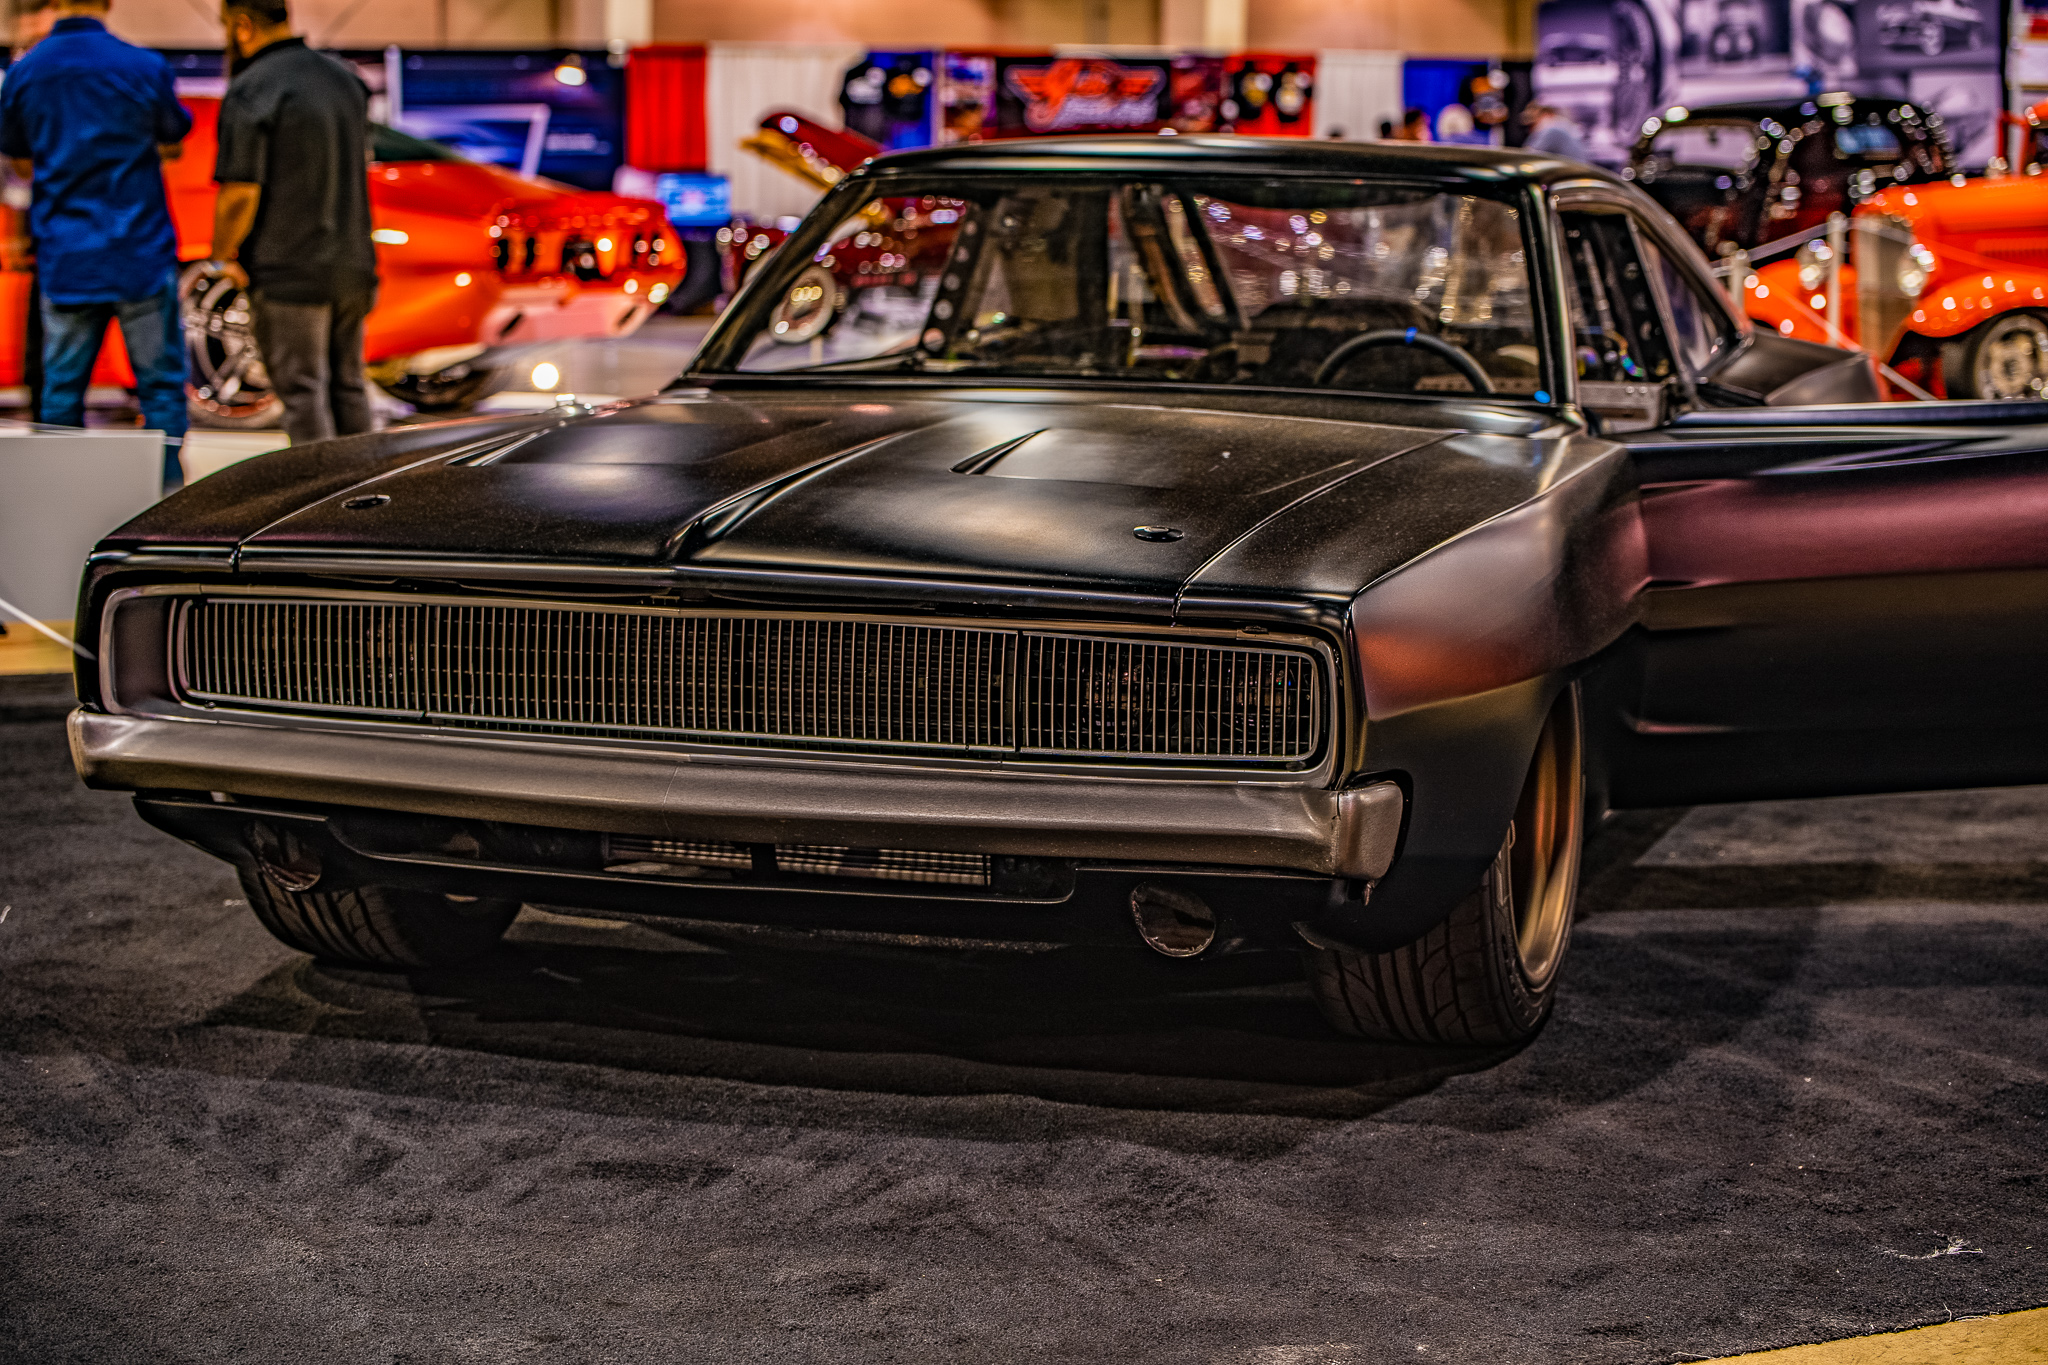 Close up look at Dom Toretto’s 1968 Dodge Charger “Hellacious”